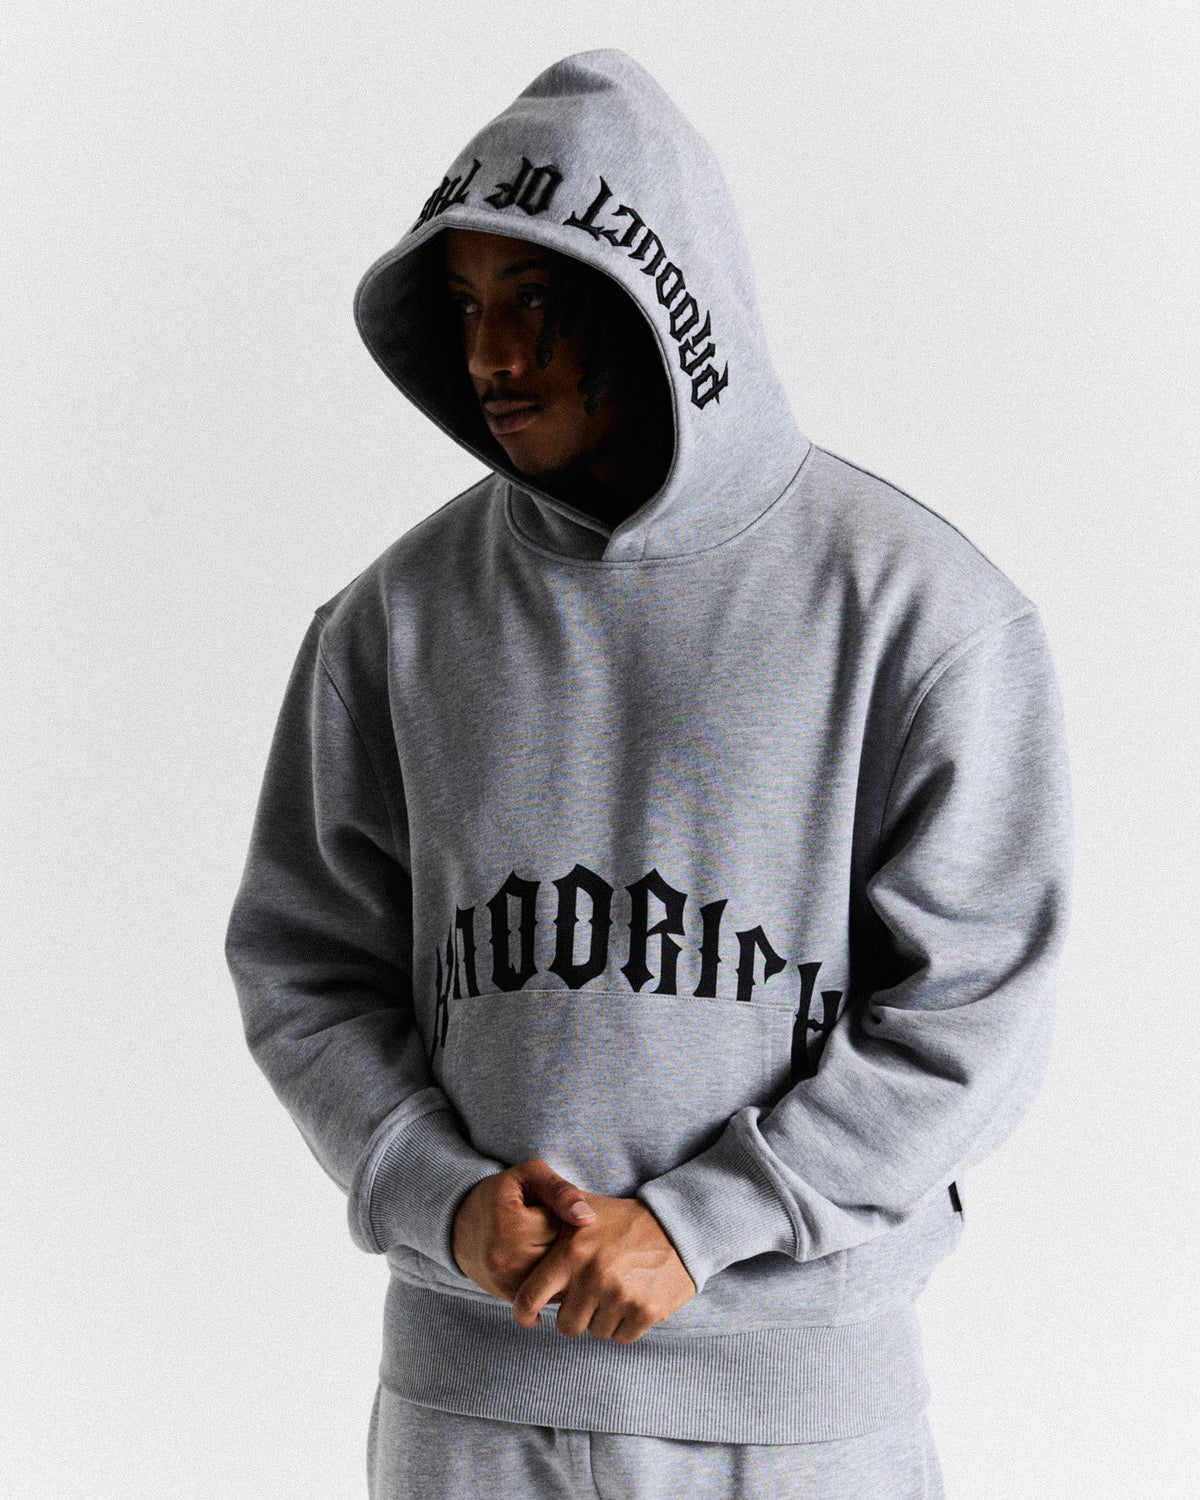 Hoodrich 2023 Winter Sports Rhoback Hoodie For Men Colorful Blue Letter  Towel Embroidered Sweatshirt And Solid Sweater Set DZ DVS6 From  Monclair_store1, $14.21